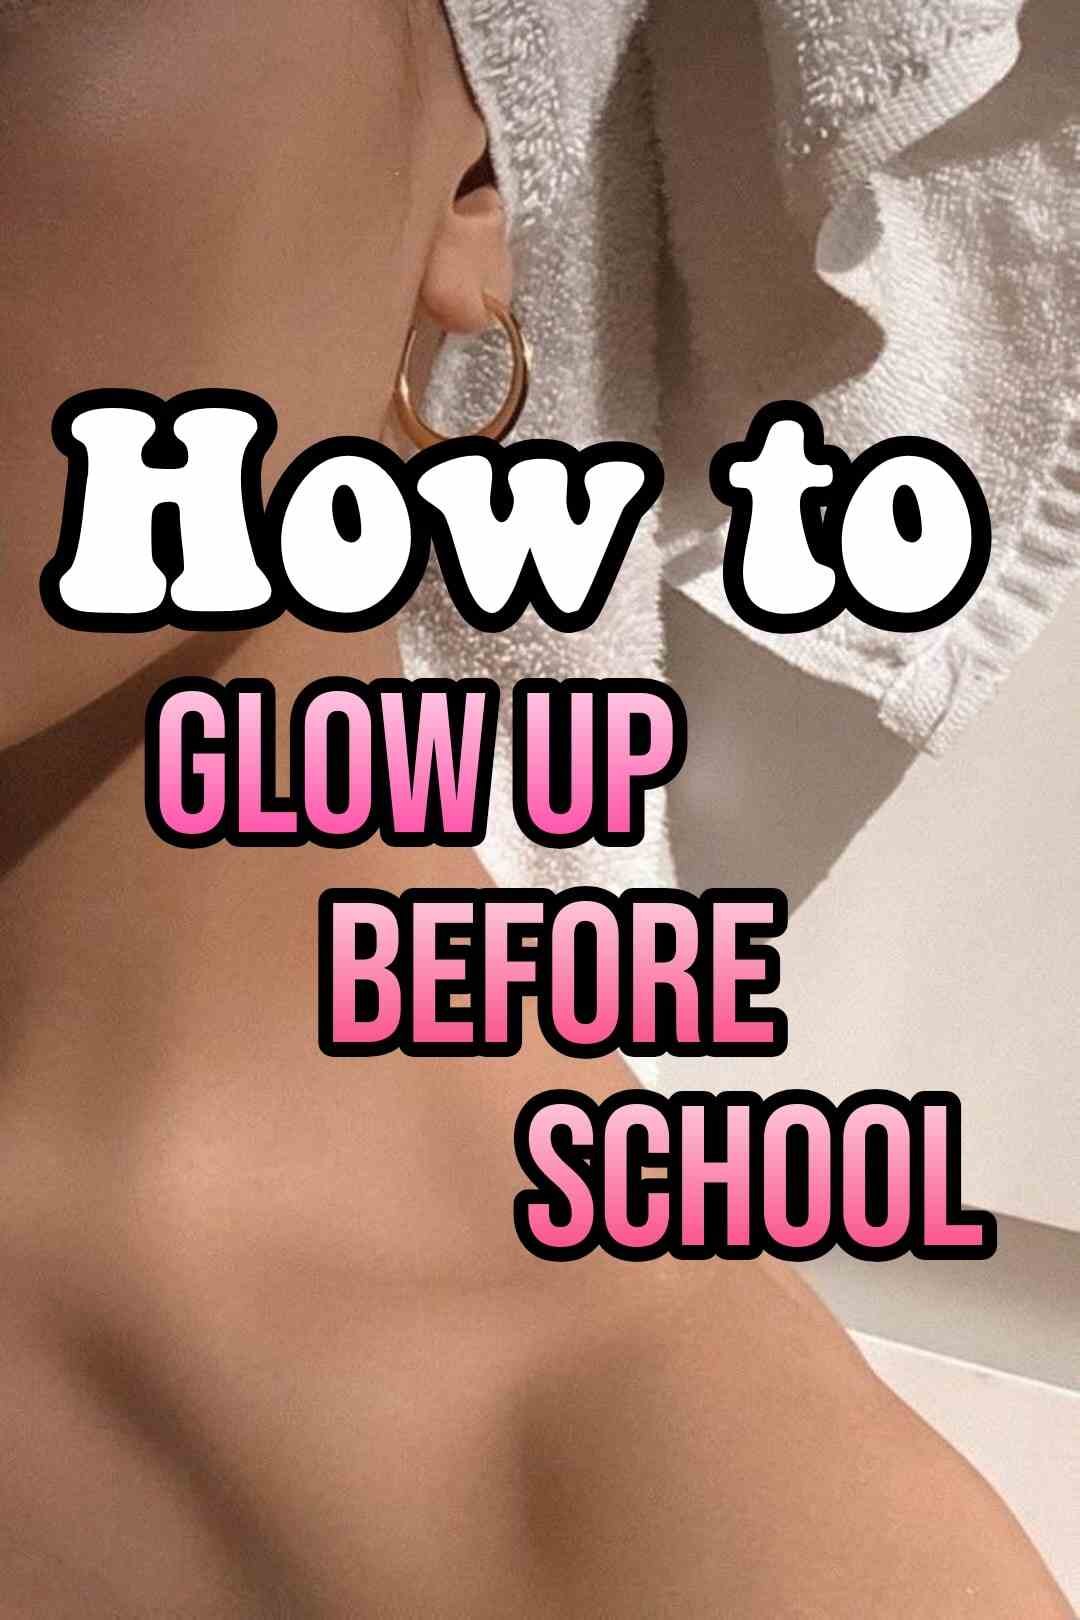 How to glow up before school